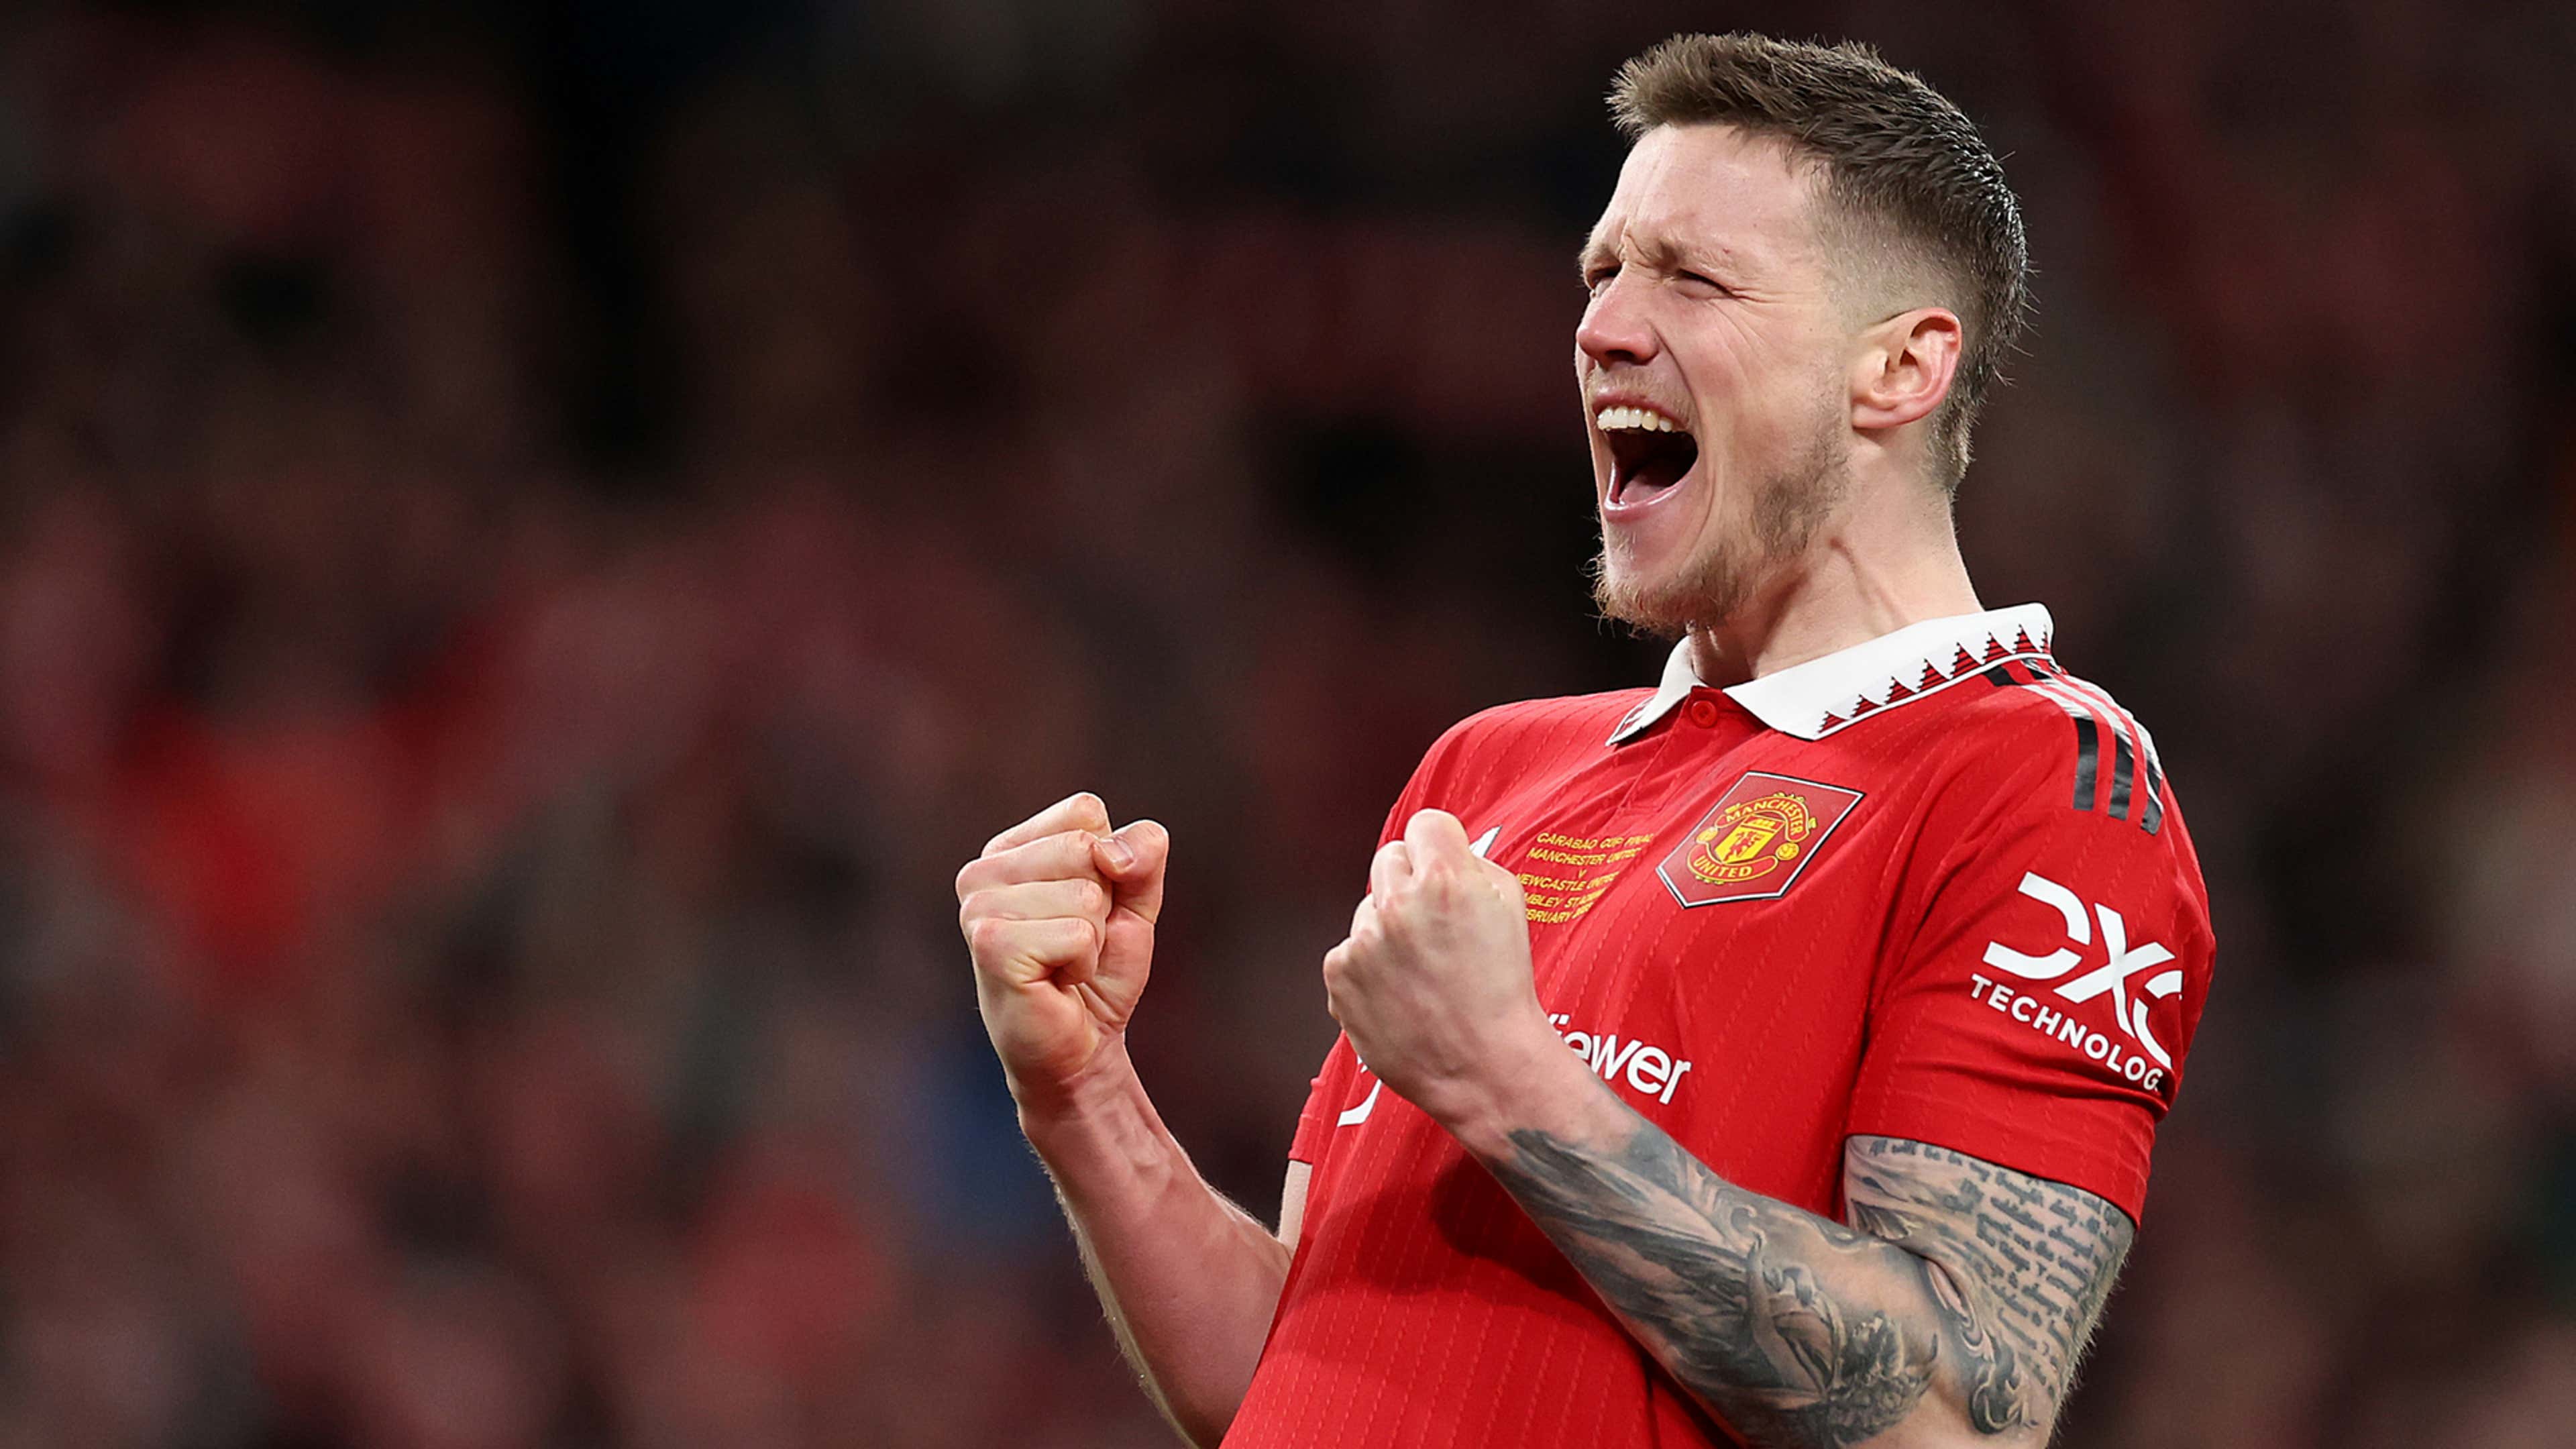 Wout Weghorst Manchester United 2022-23 Carabao Cup final